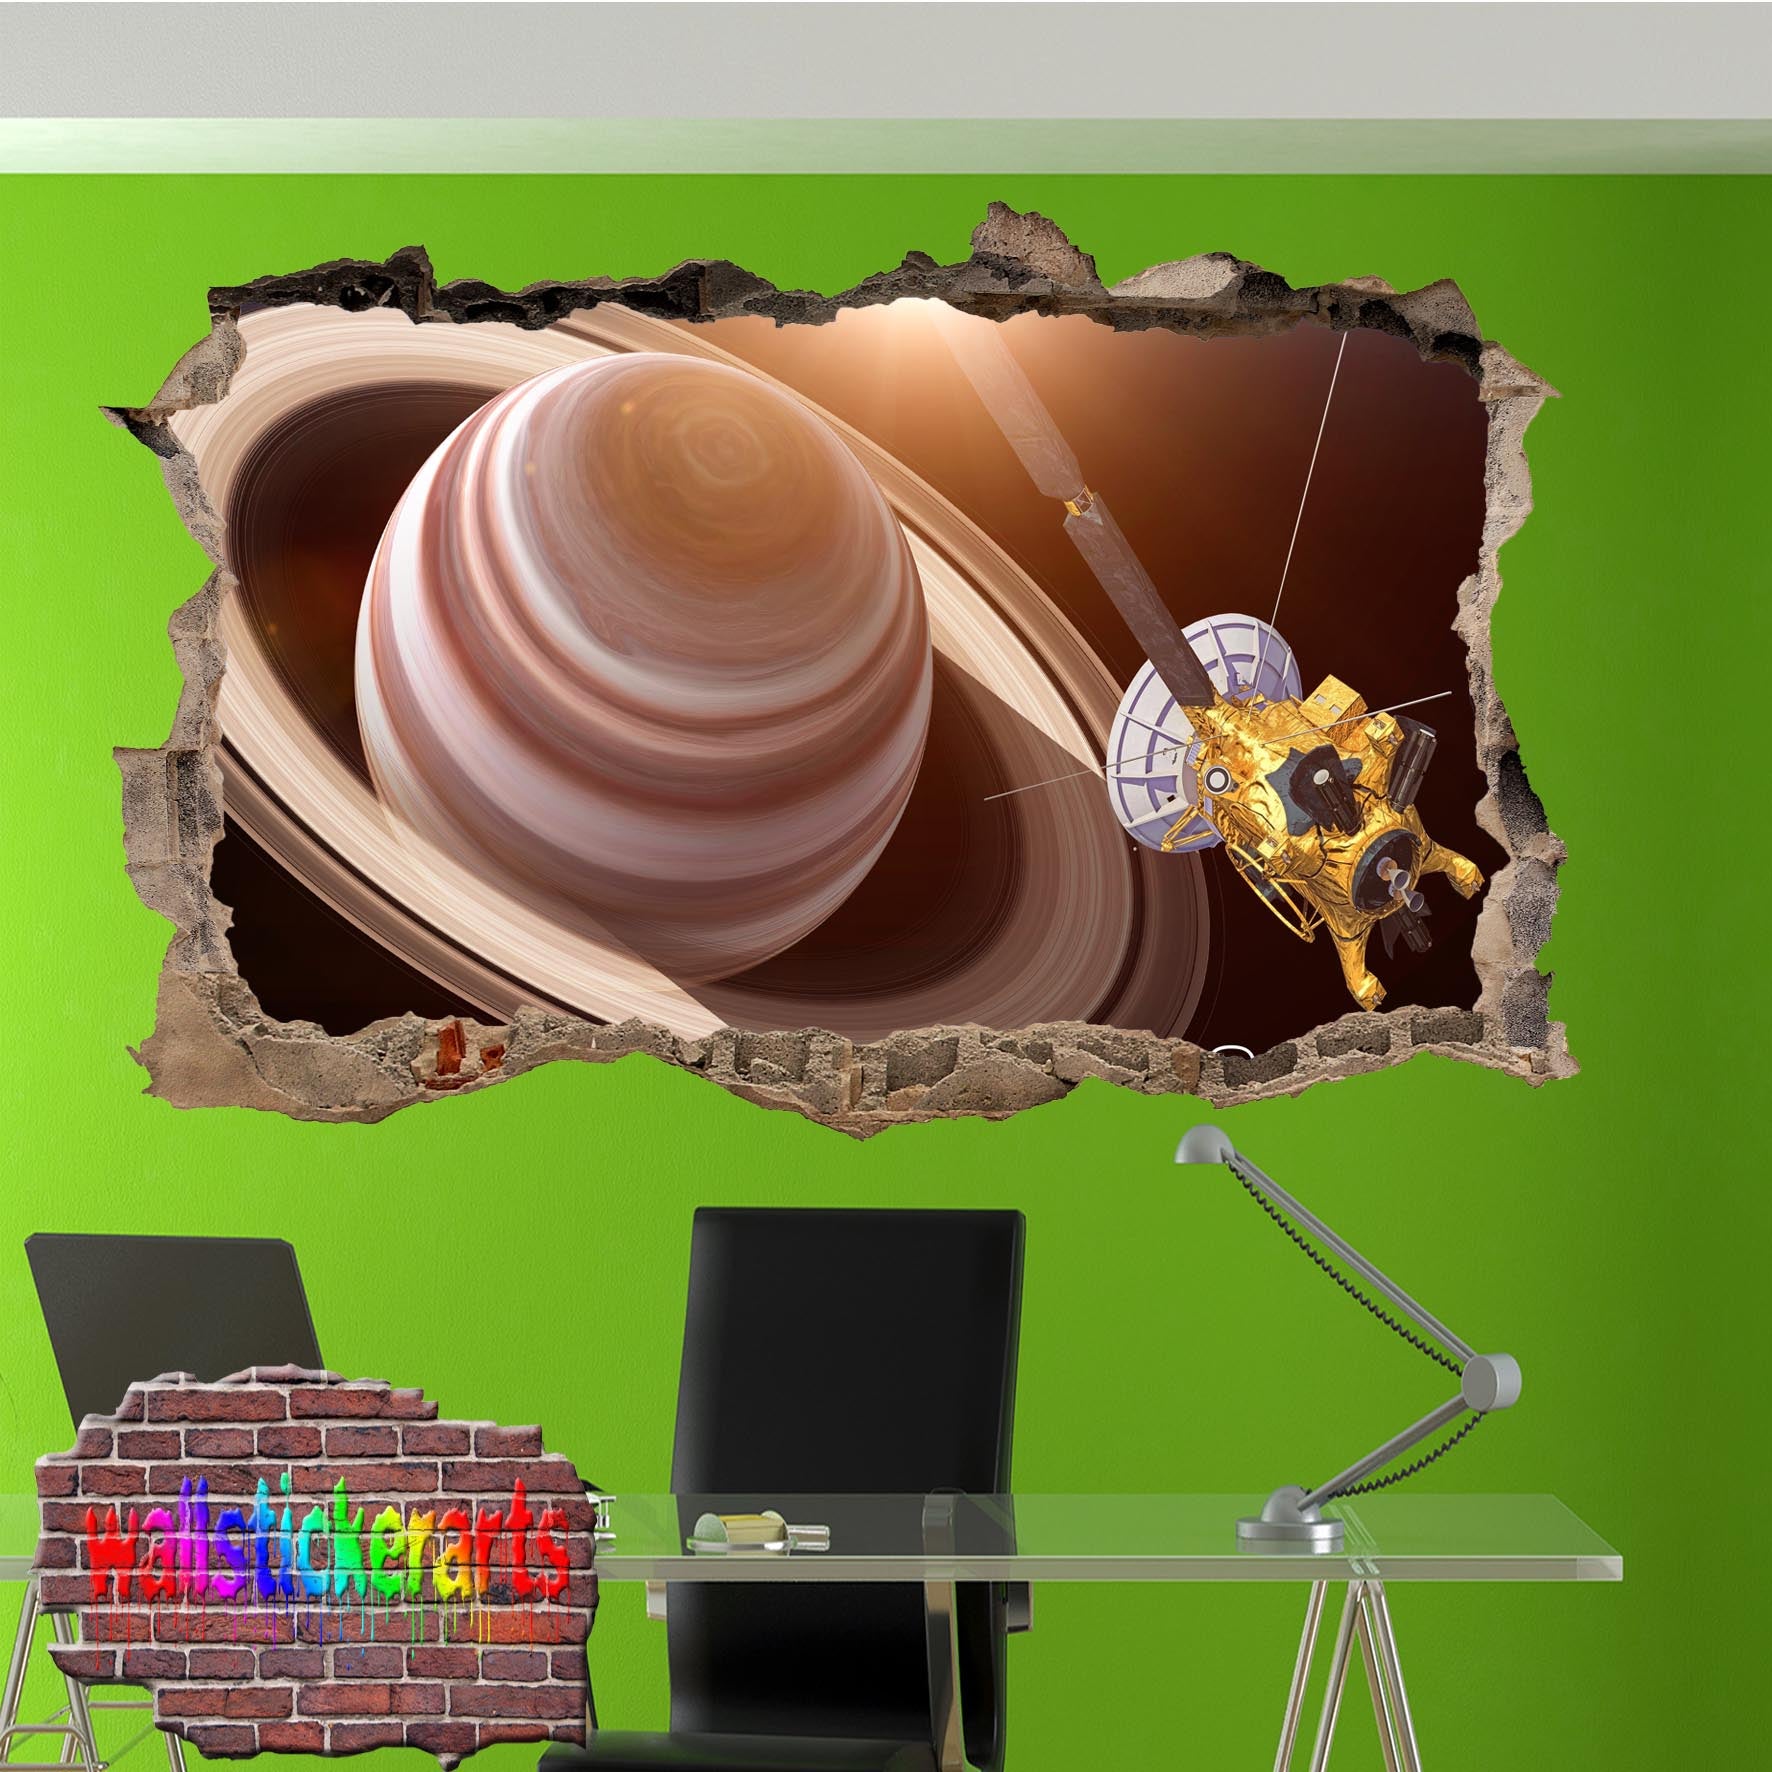 Planets Saturn Satellite Cassini Wall Sticker Poster Decal Mural